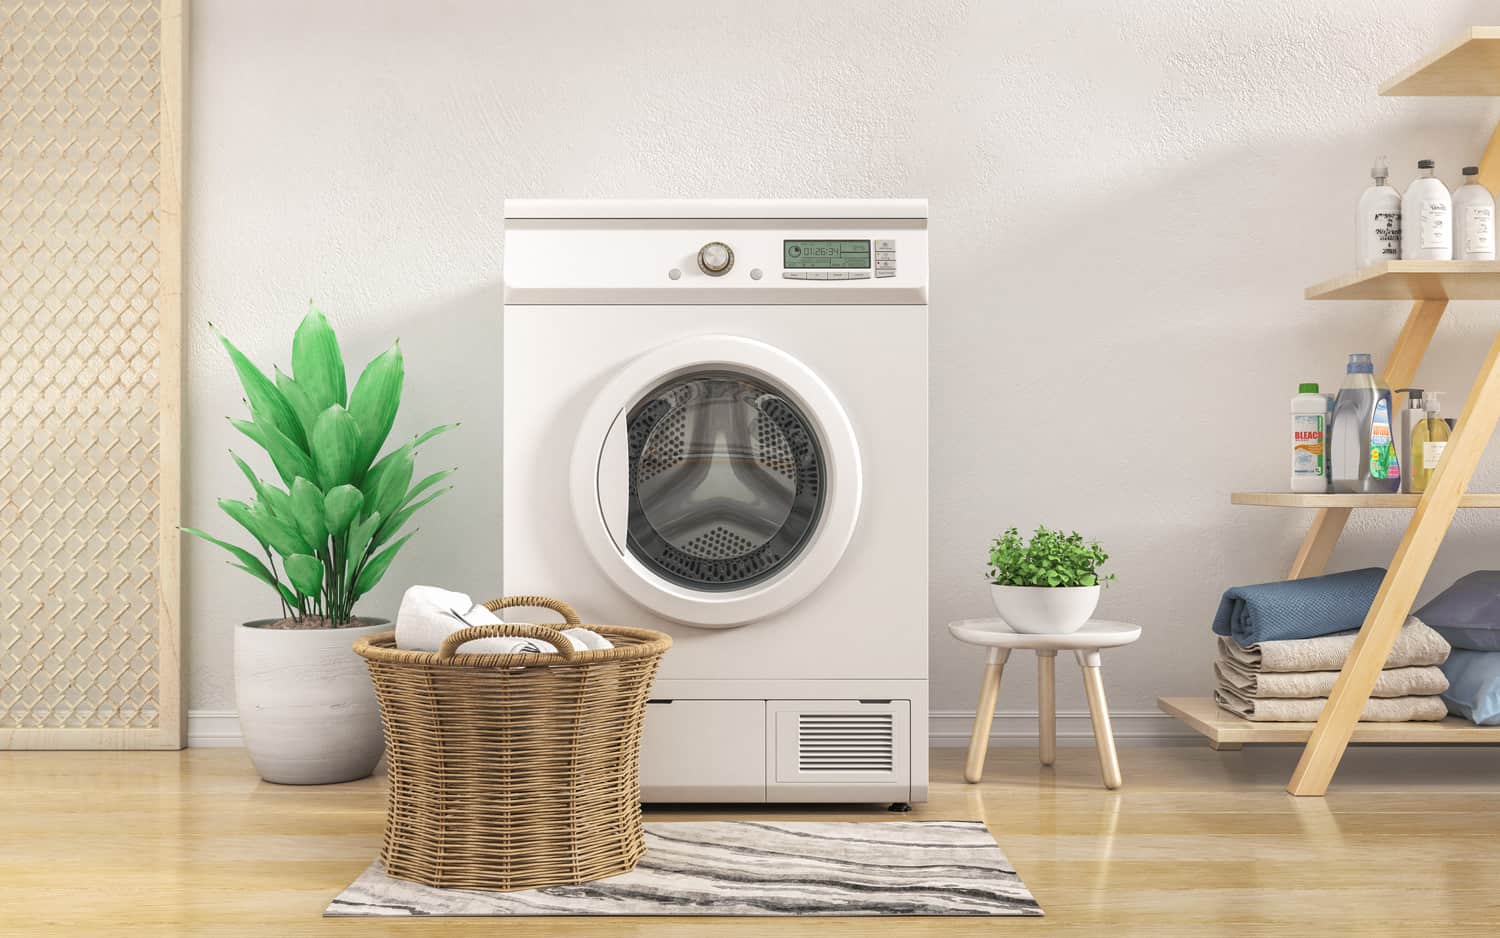 Laundry room with white wall,wooden floor and flowers